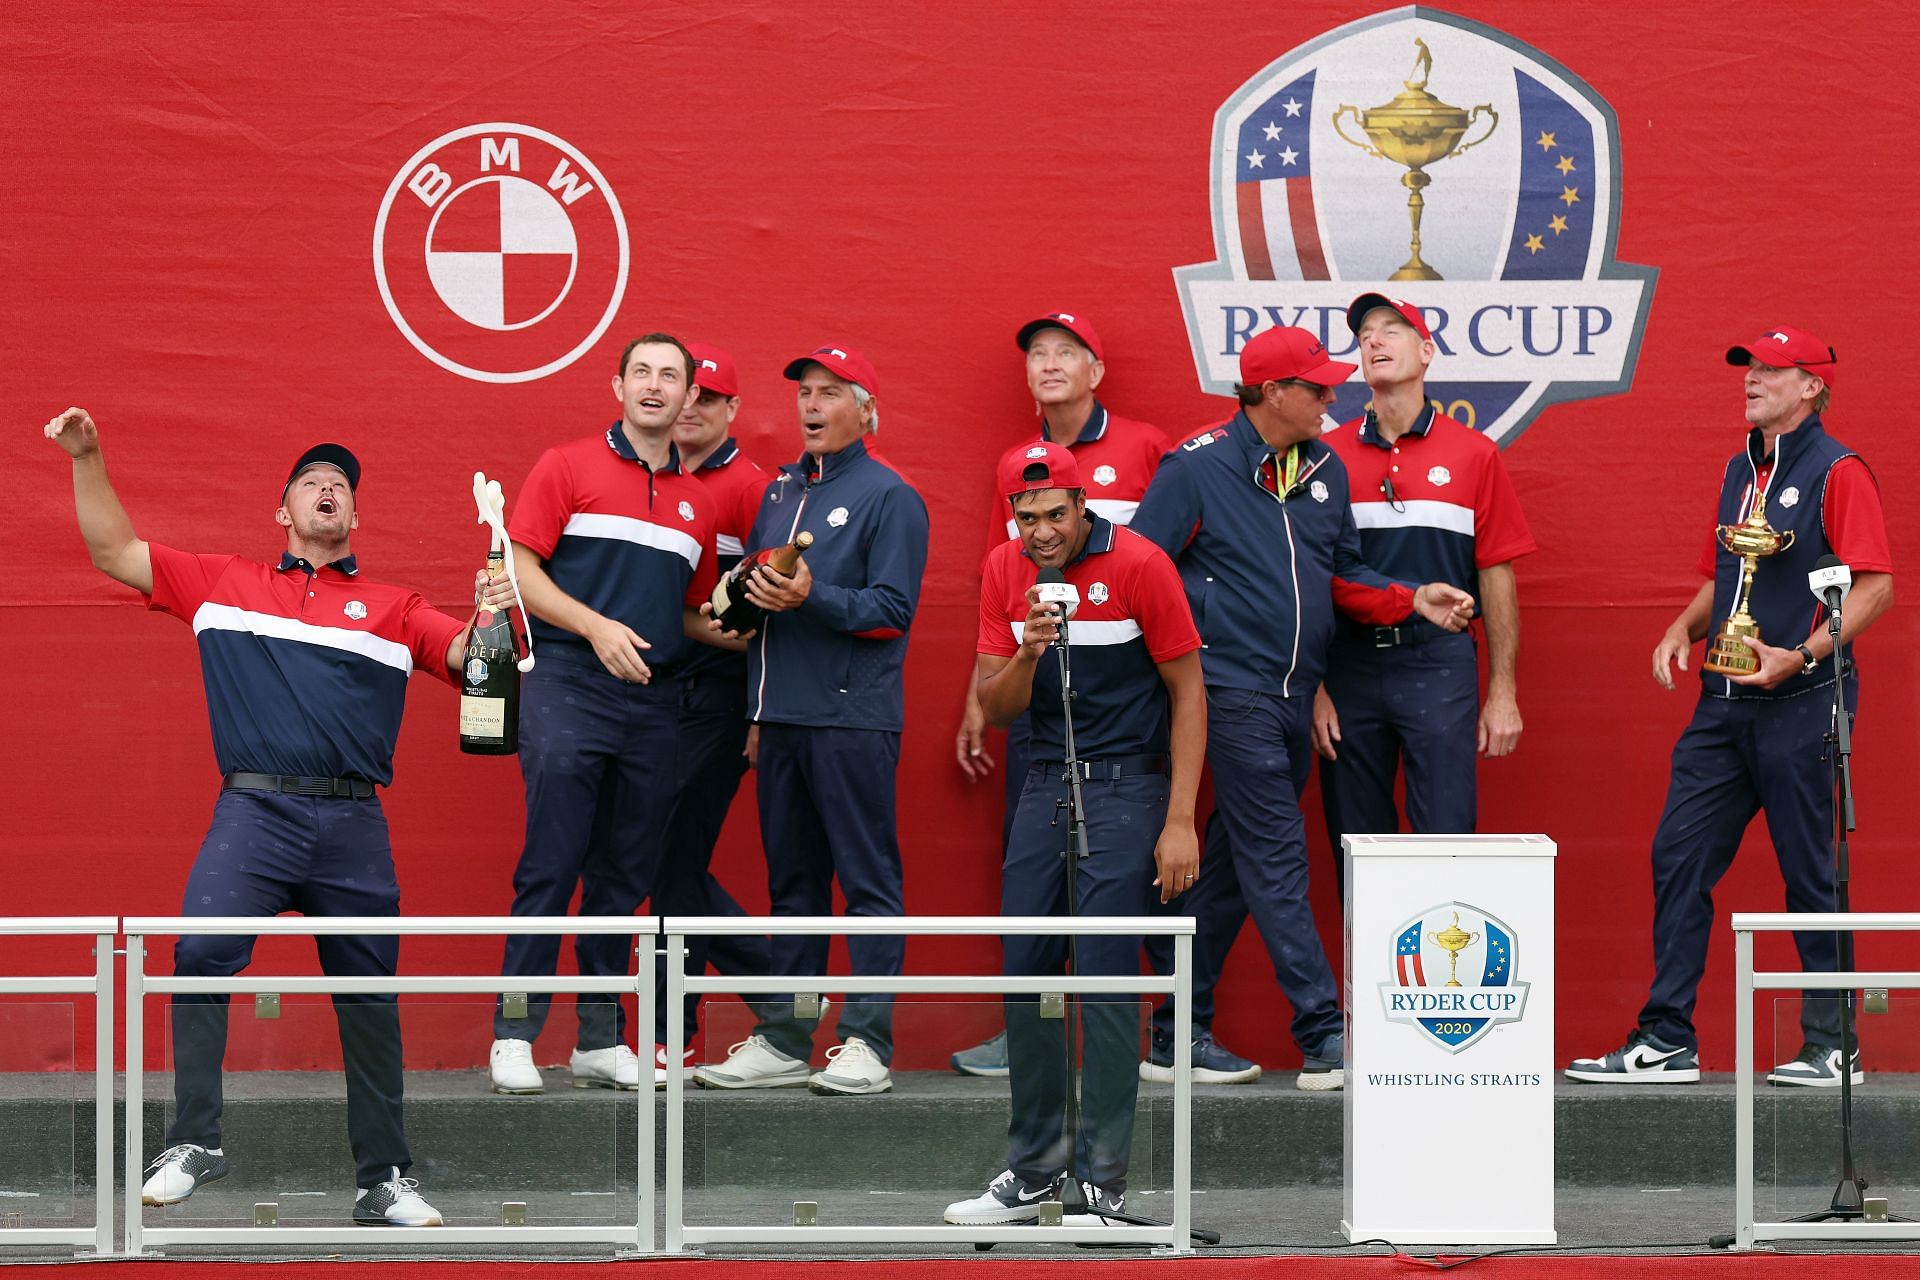 Team US celebrates with champagne after defeating team Europe during Sunday Singles Matches of the 43rd Ryder Cup at Whistling Straits in 2021